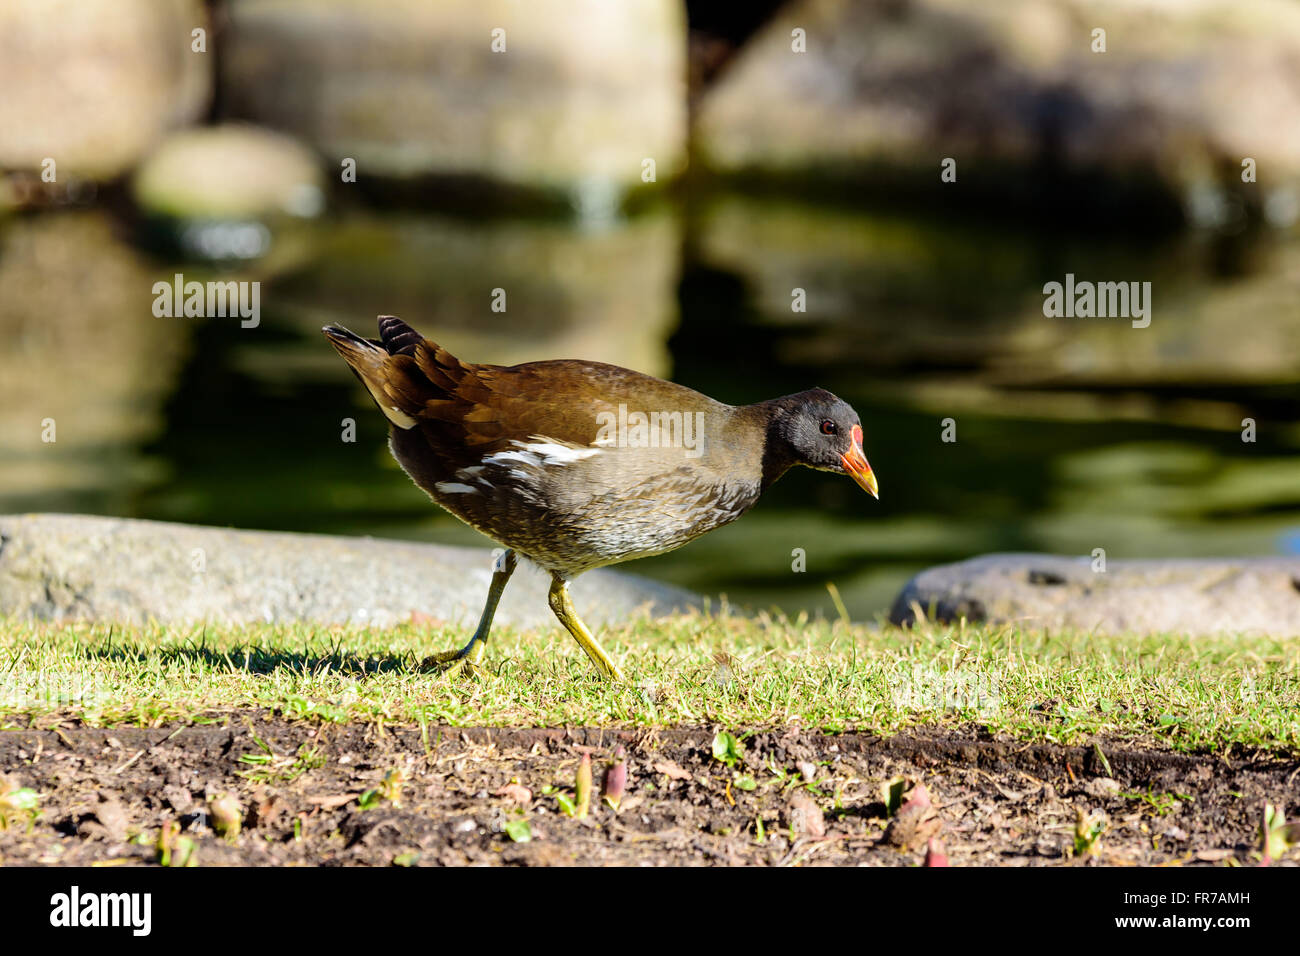 One common moorhen (Gallinula chloropus) walking by the waters edge in a public park. Bird is also known as swamp chicken. Young Stock Photo